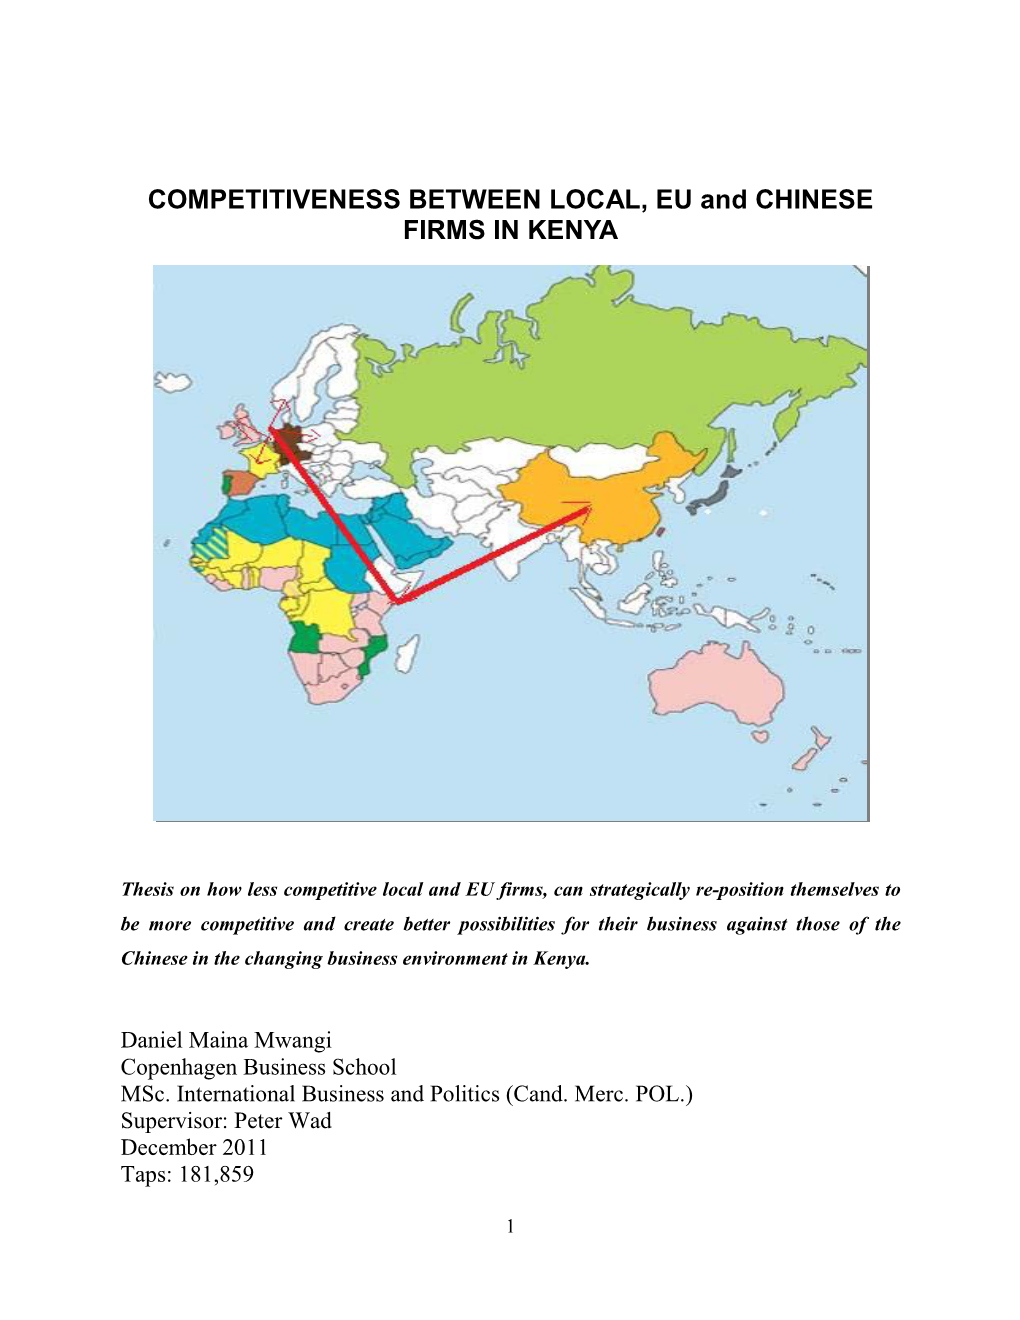 COMPETITIVENESS BETWEEN LOCAL, EU and CHINESE FIRMS in KENYA